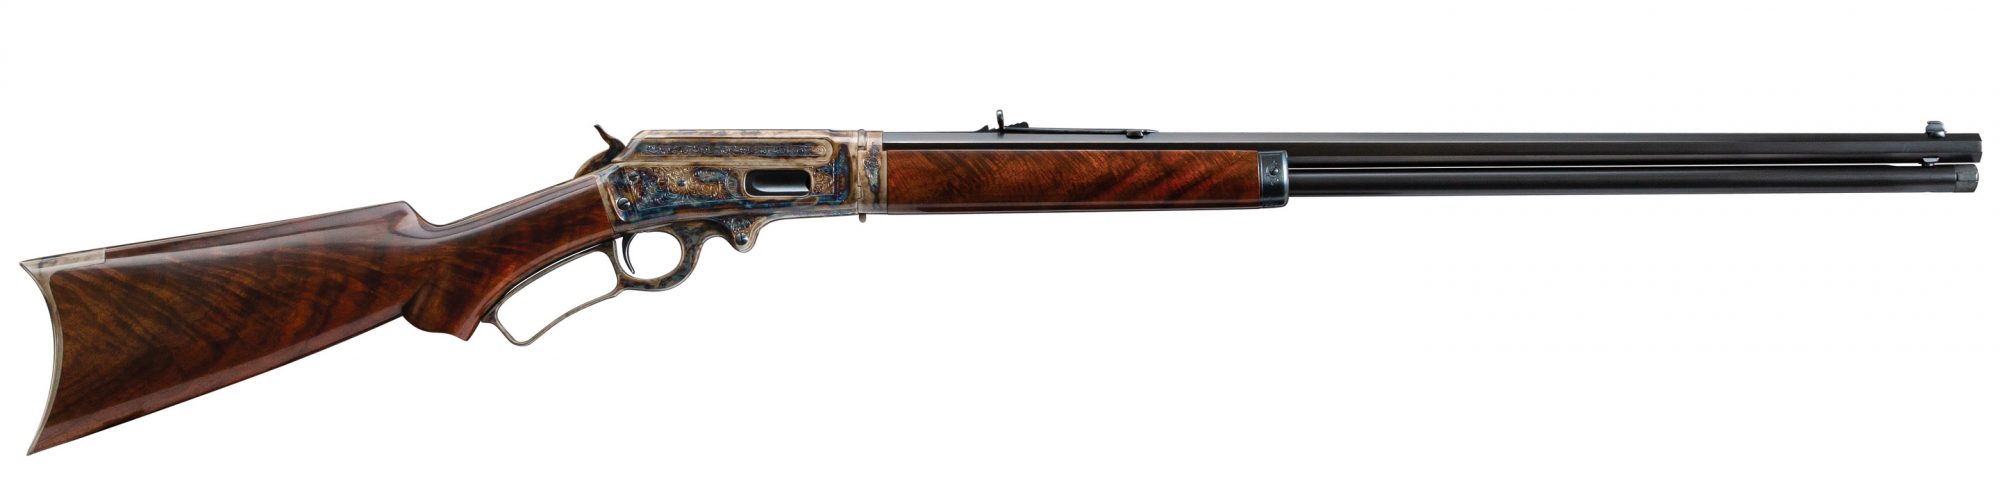 Photo of a Marlin Model 1893 from 1906, after restoration by Turnbull Restoration of Bloomfield, NY